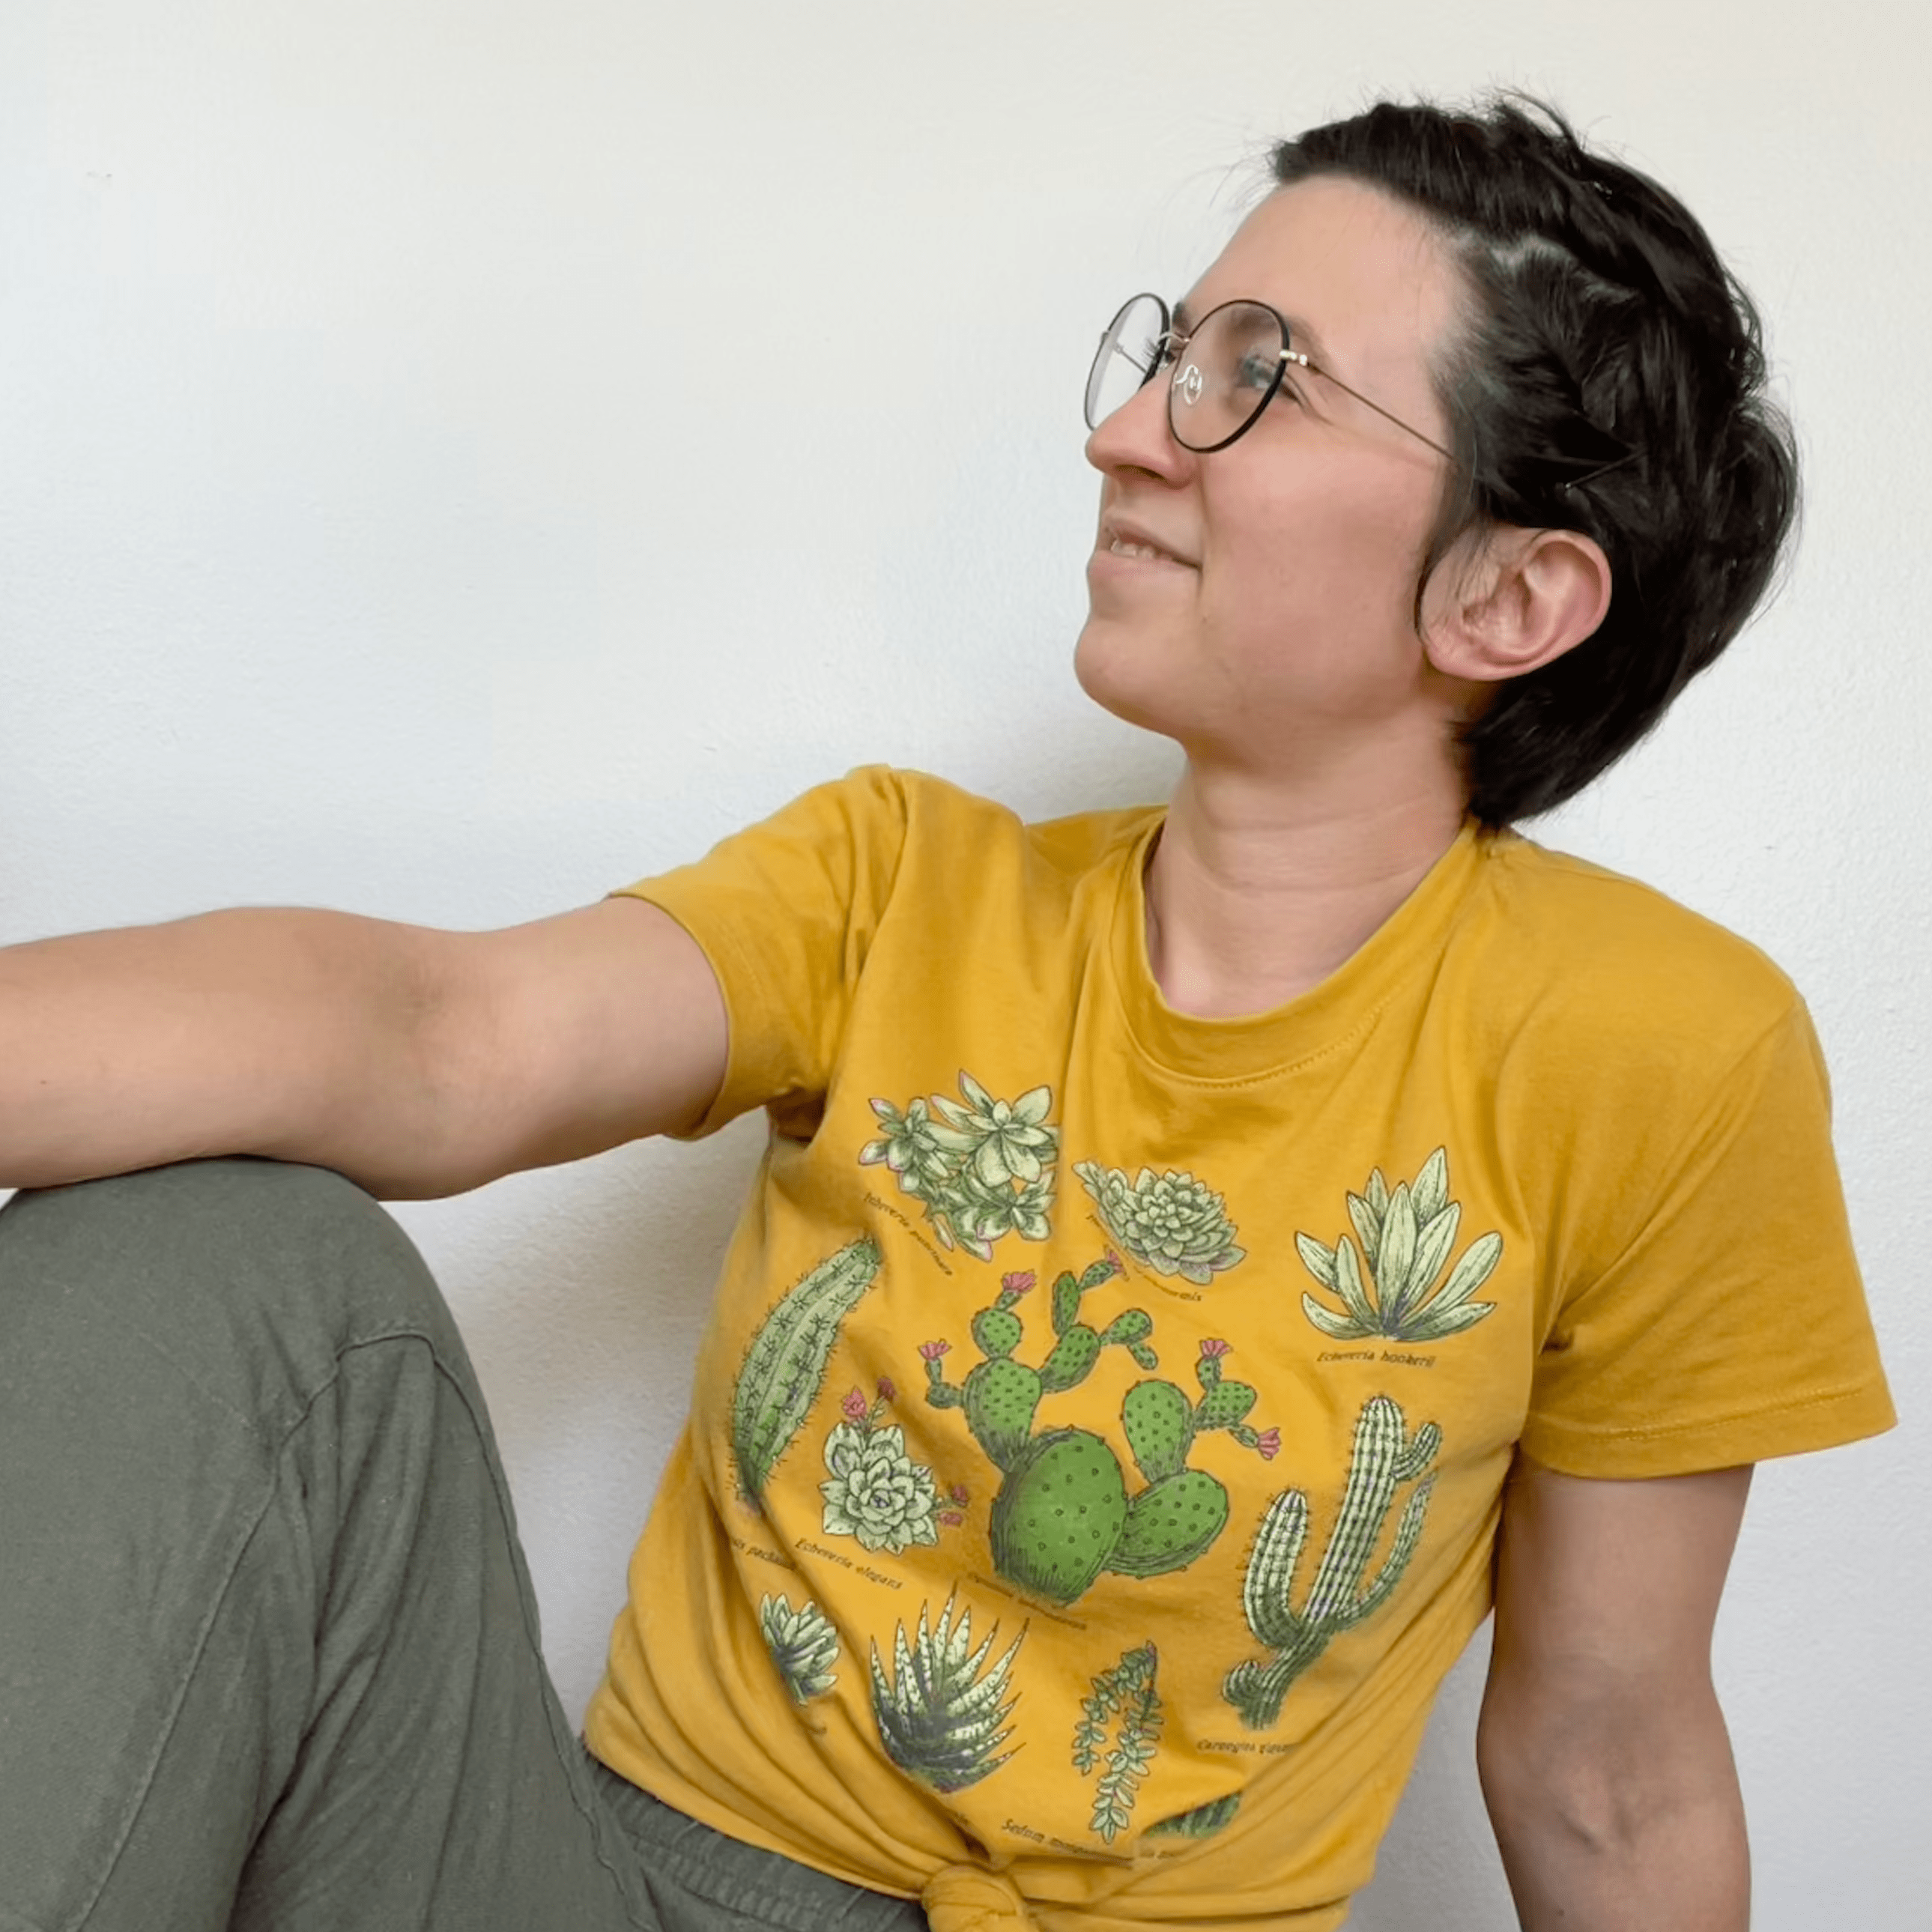 Image of Anna in a yellow shirt and green pants